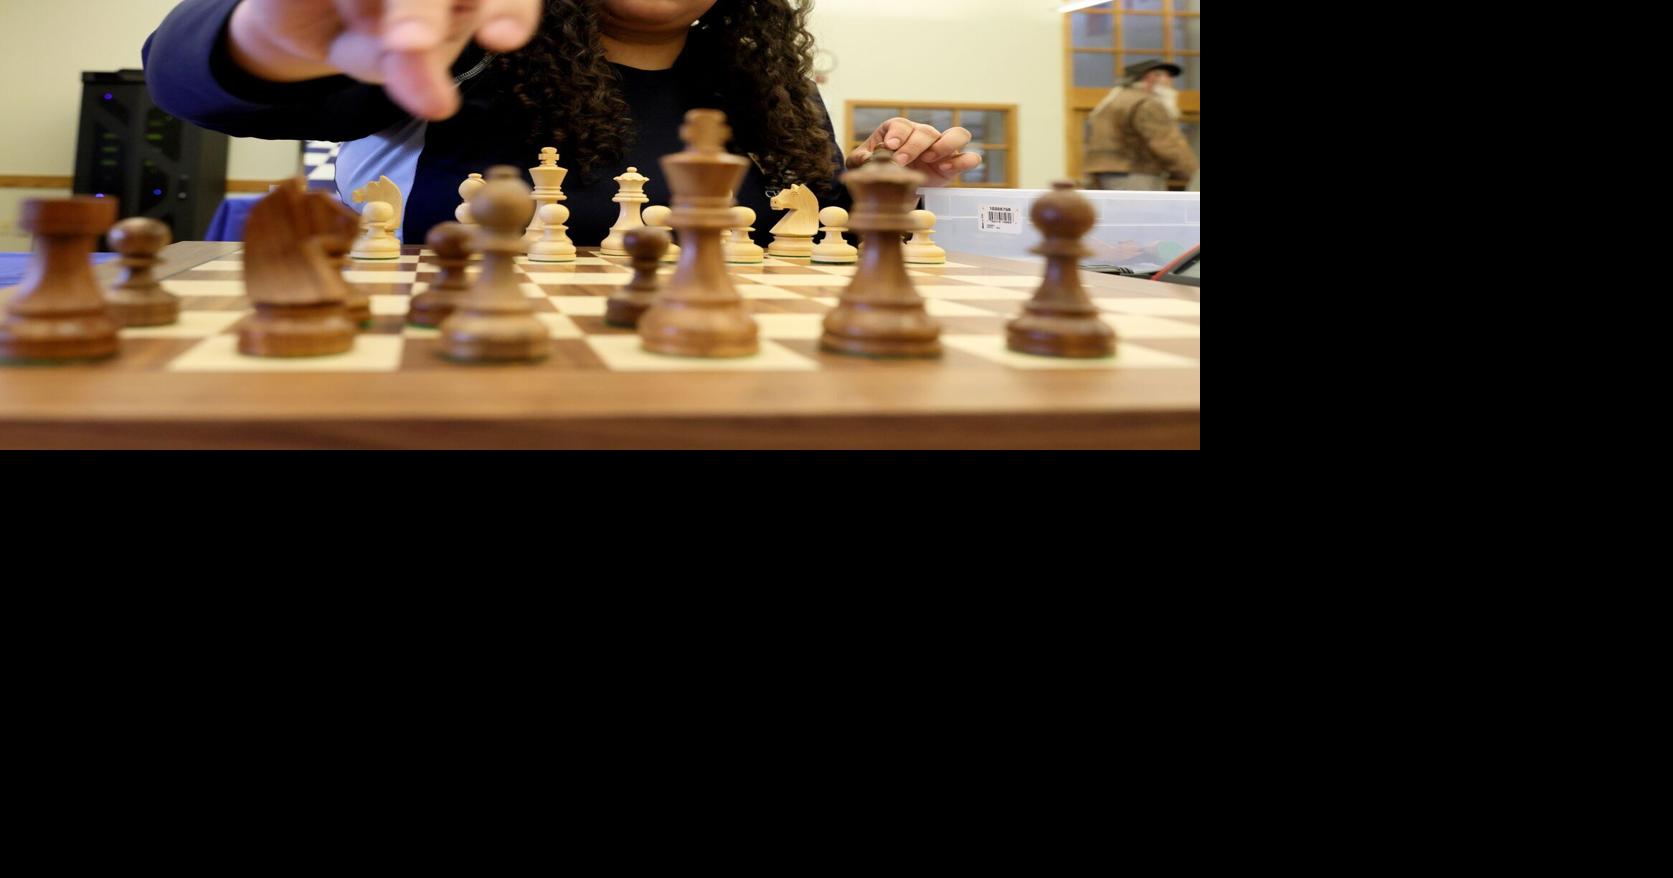 Lubbockite claims win at U.S. Women's Chess Championship in St. Louis